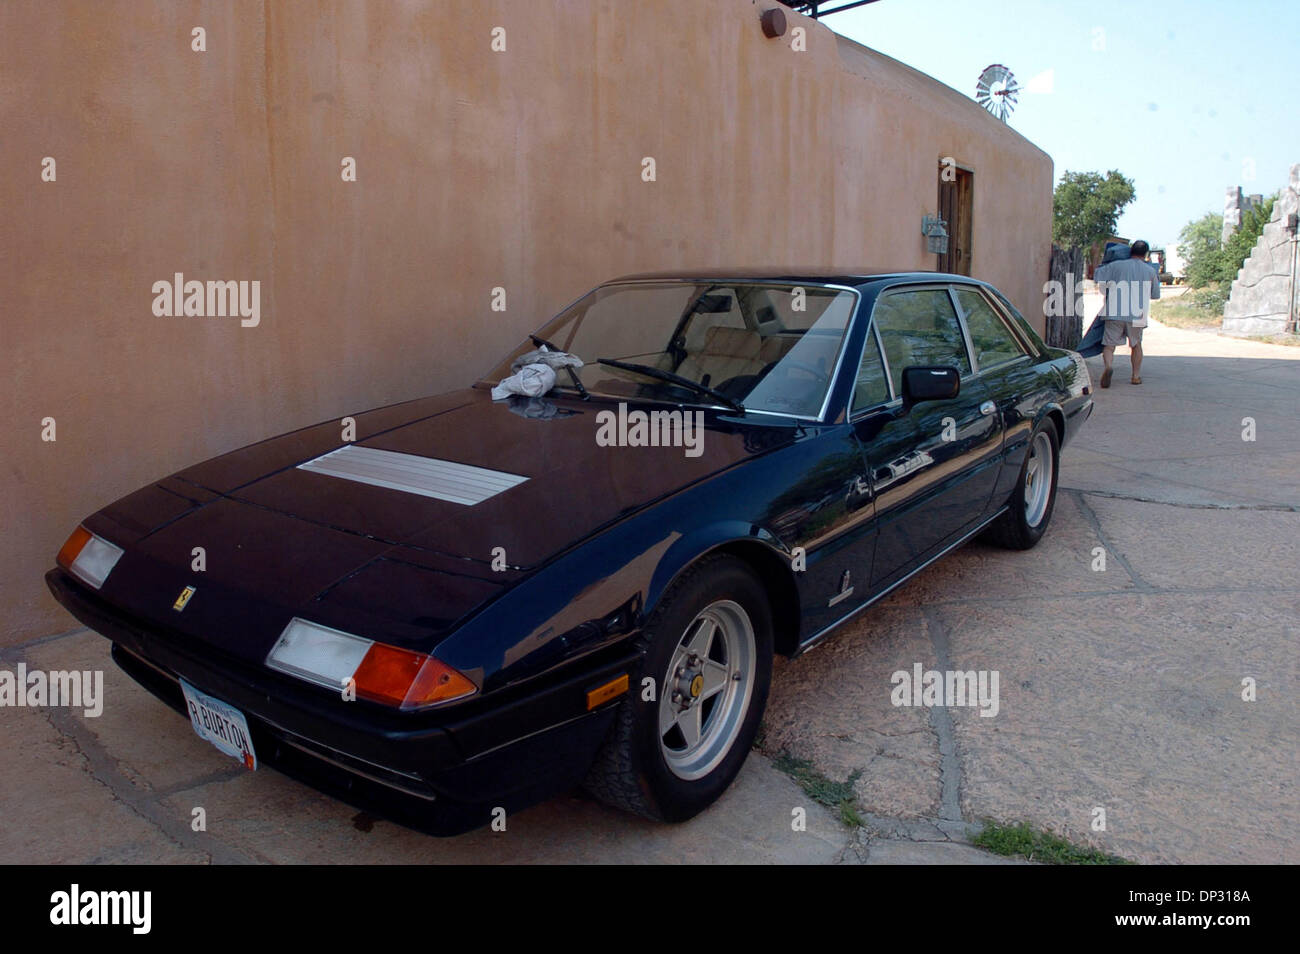 Jun 15, 2006; Fredericksberg, TX, USA; A 1982 Ferrari 400i, automatic, leather which belonged to famous actor Richard Burton former husband of Elizabeth Taylor will be on the auction block in Lot 400 in Fredericksburg, Texas. Mandatory Credit: Photo by Delcia Lopez/San Antonio Express-News/ZUMA Press. (©) Copyright 2006 by San Antonio Express-News Stock Photo